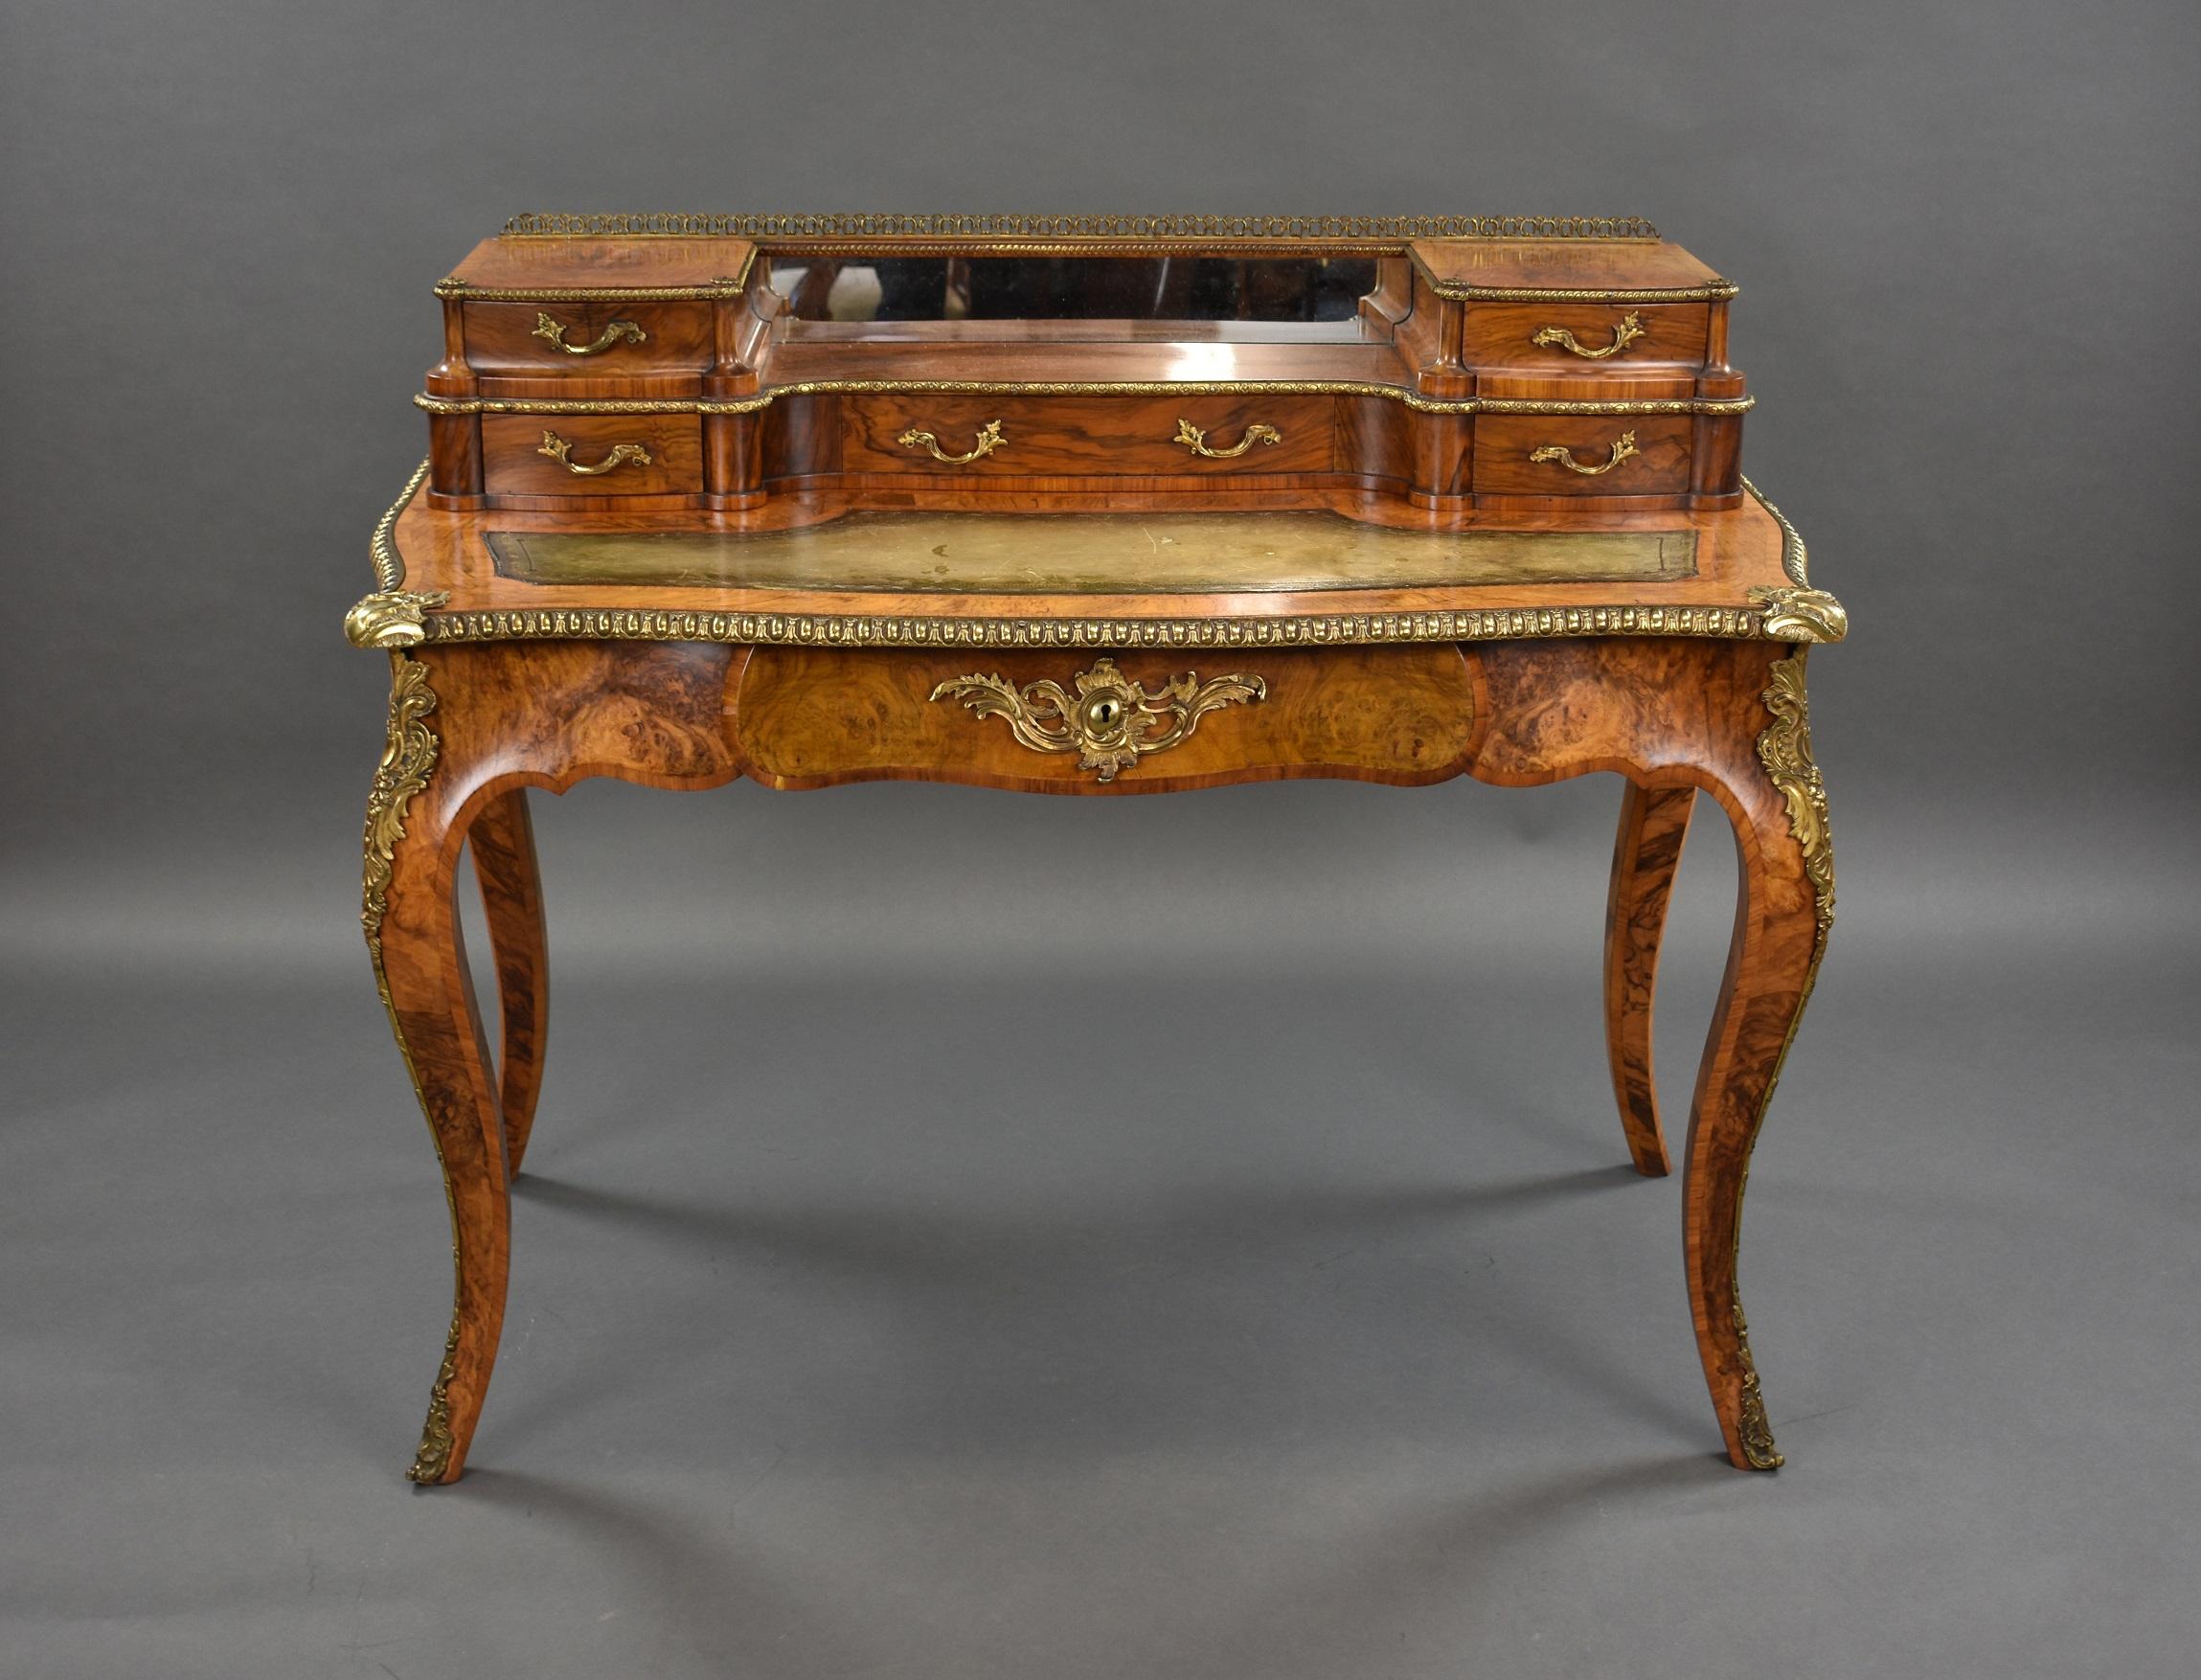 For sale is a fine quality Victorian burr walnut writing table, with gilt brass mounts, the raised back with a pierced gallery above a mirror and fitted with five drawers, above a hand coloured leather hide writing surface over a frieze drawer